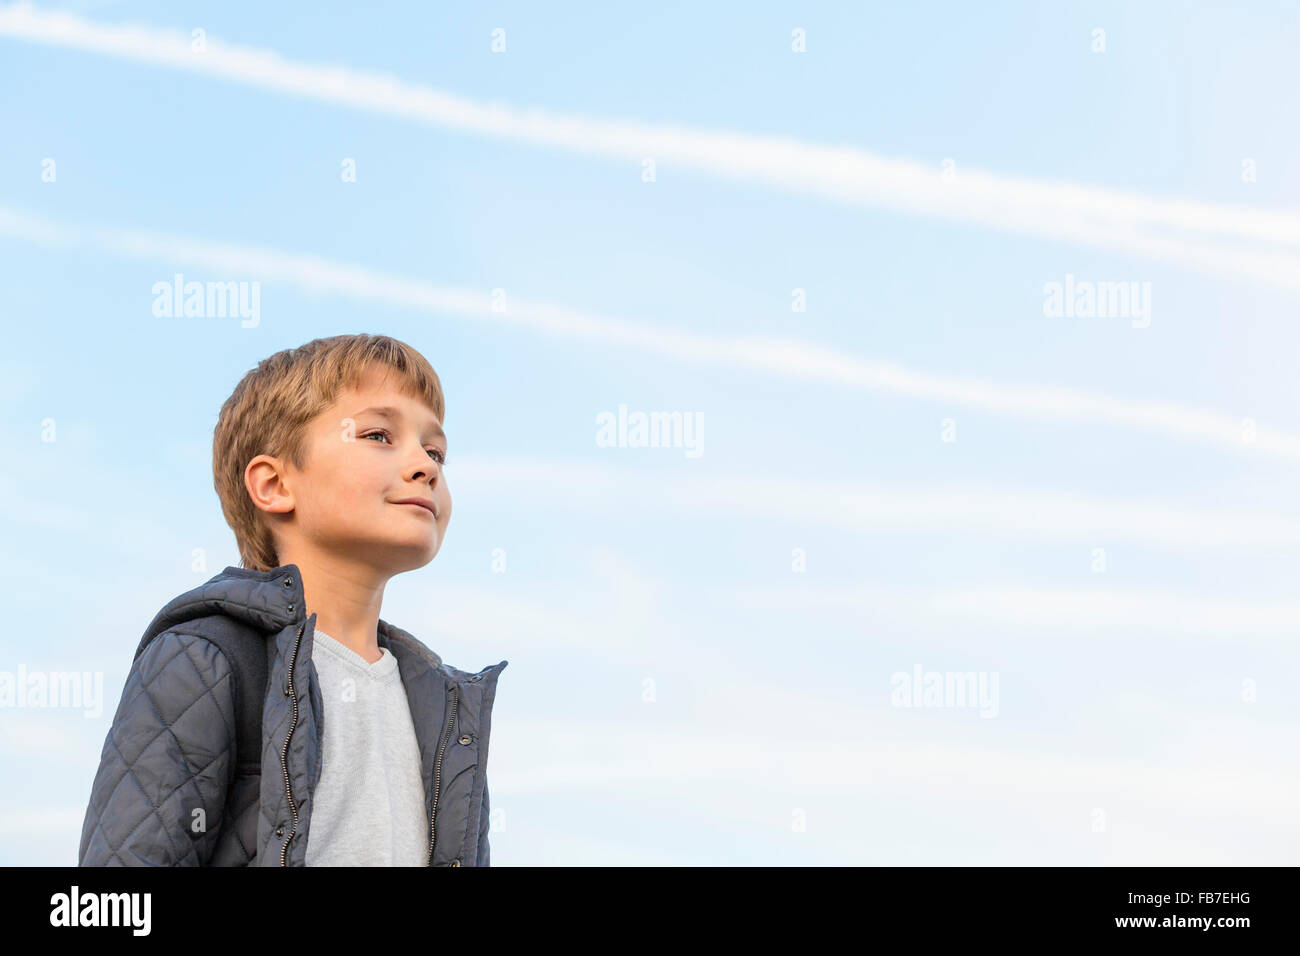 Low angle view of boy looking away against sky Stock Photo